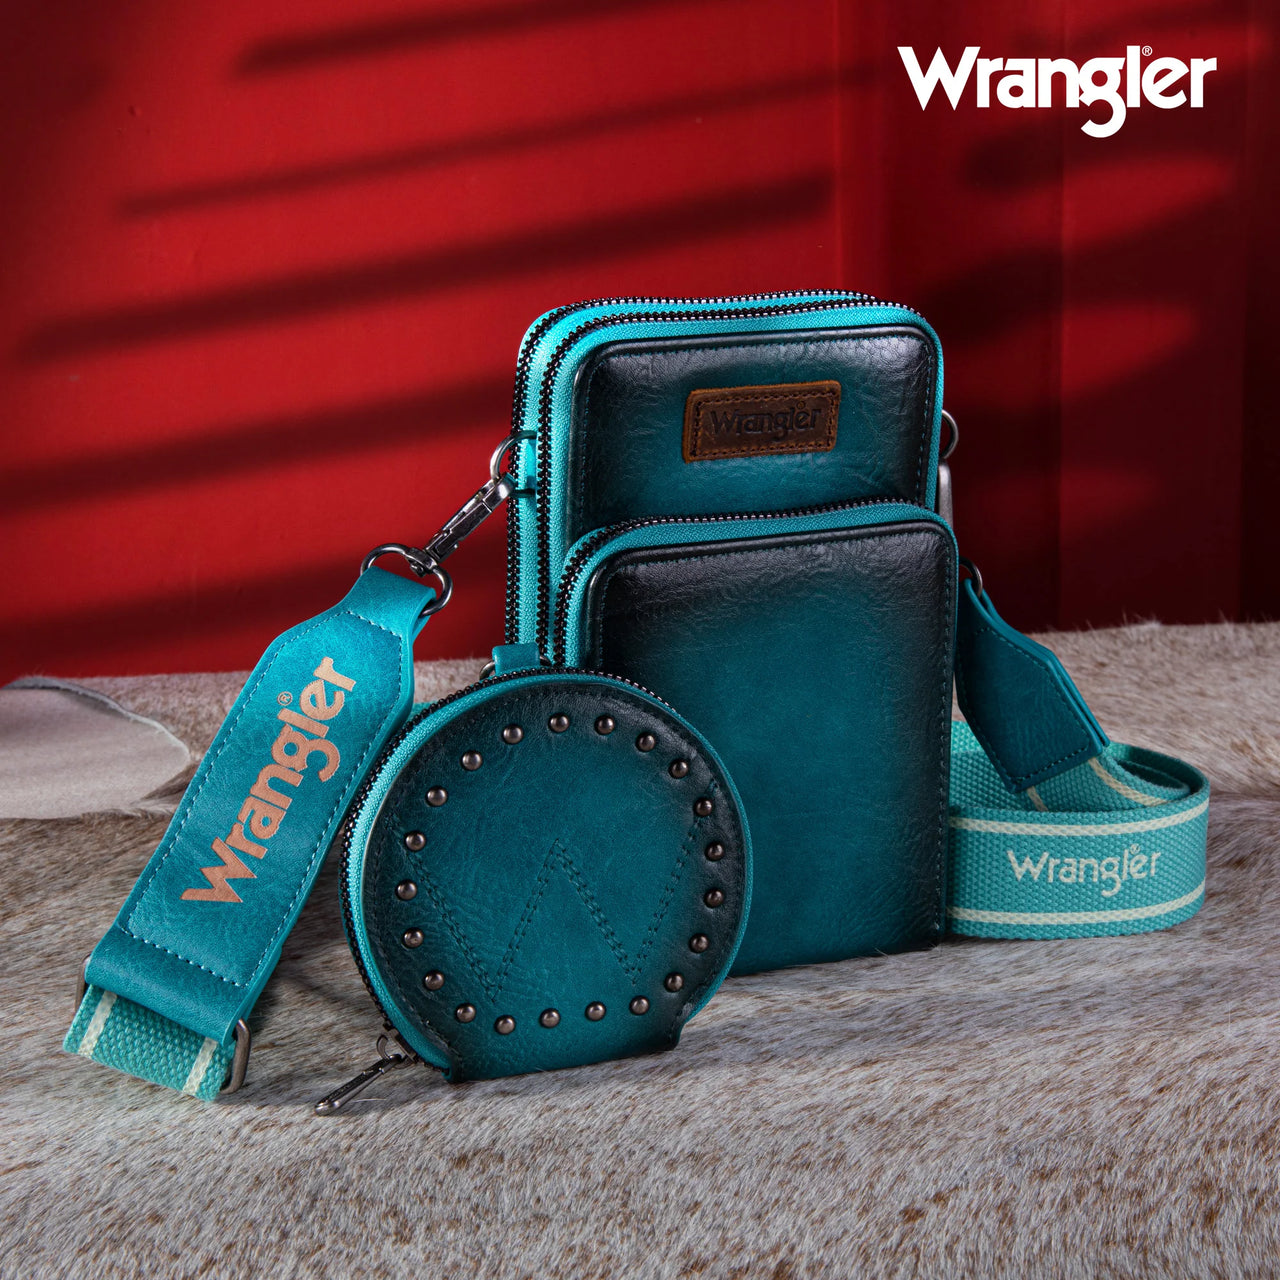 Wrangler Women's Crossbody Cell Phone Phase 3 Zipper Compartment w/Coin Pouch - Turquoise